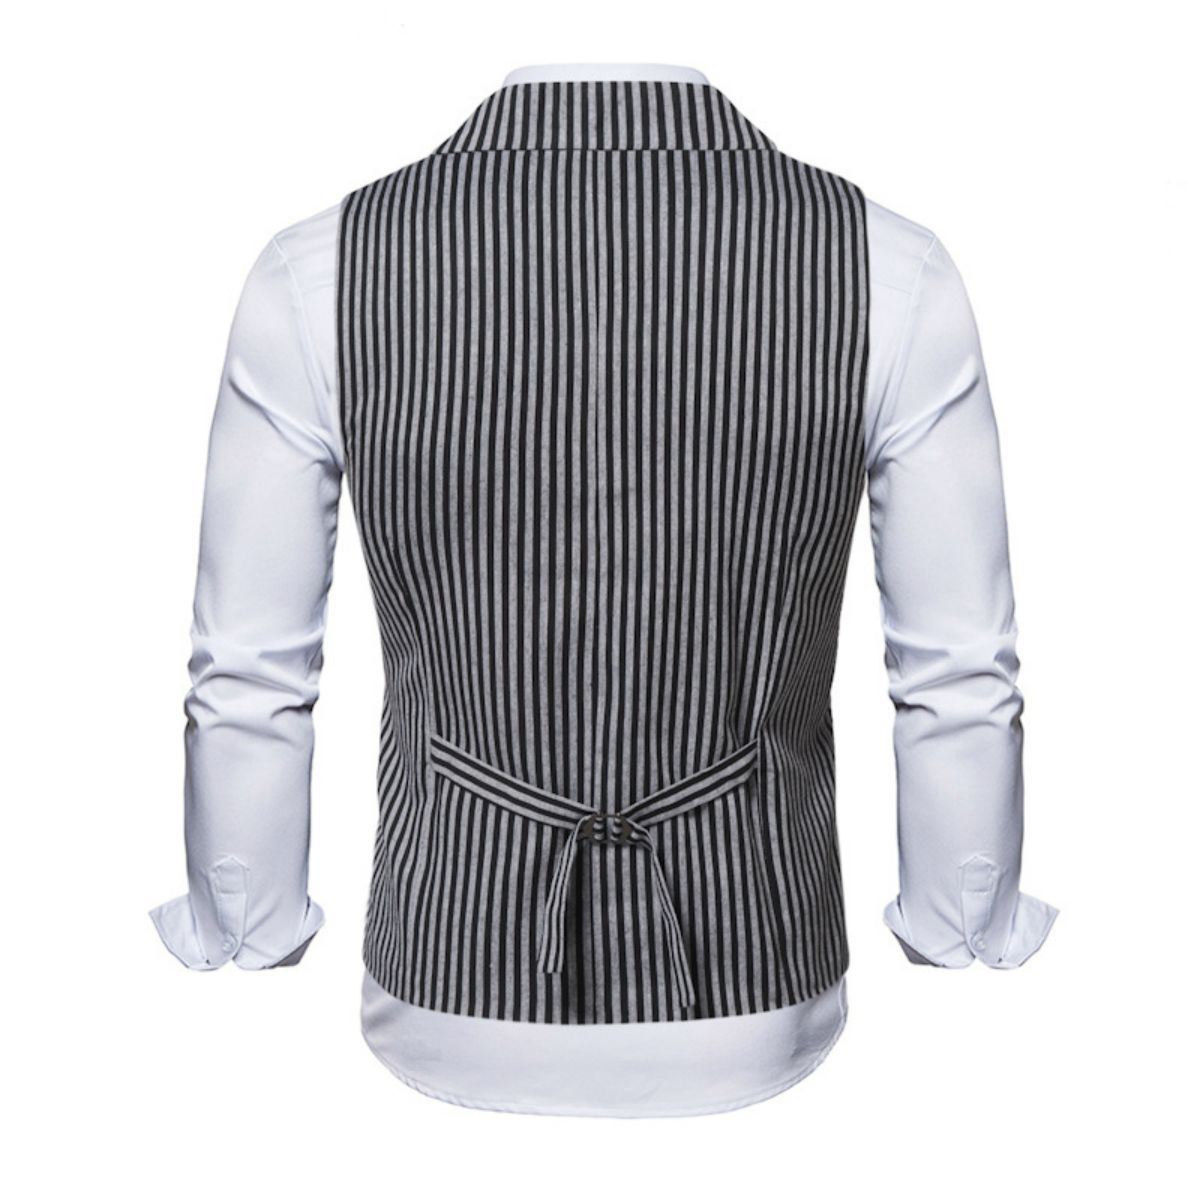 Mens Vertical Striped Waistcoat Peak Lapel Suit Vests for Formal Occasions Business Work Party Wedding Dance Dinner